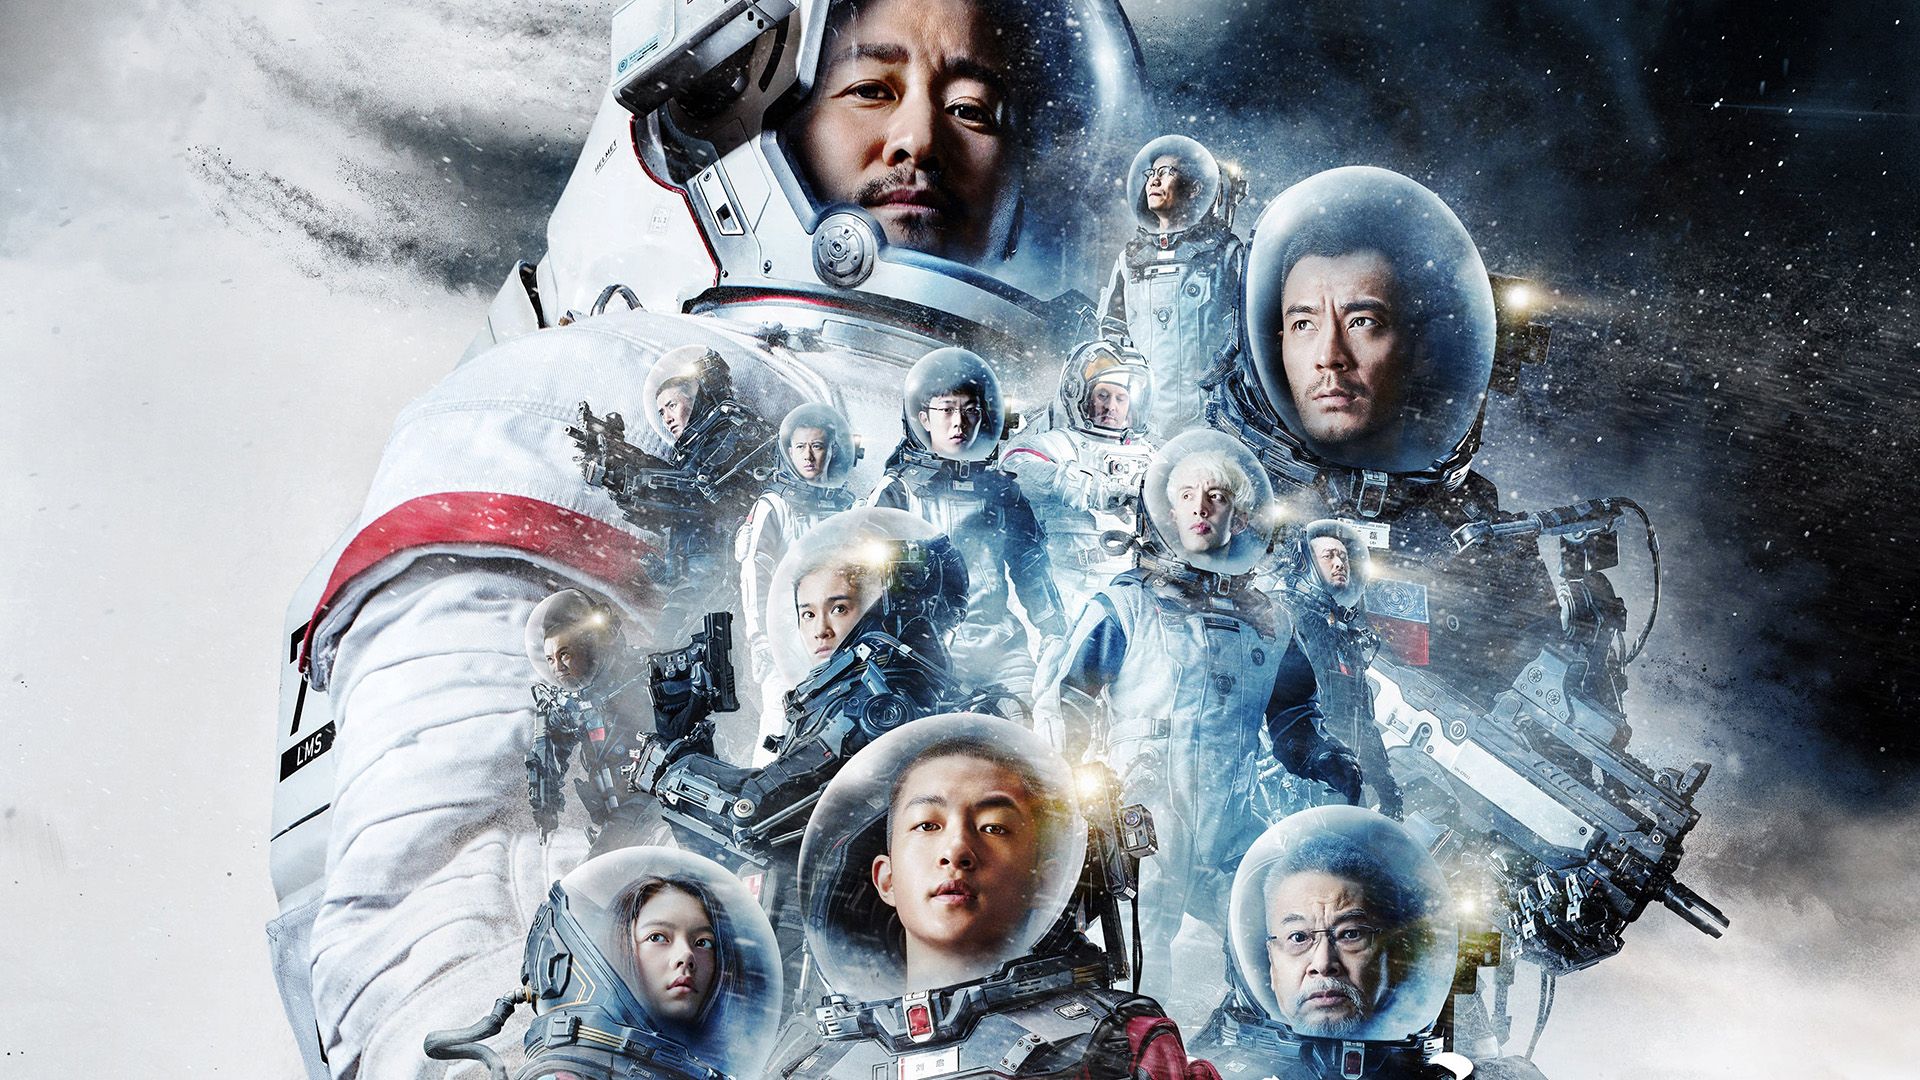 The Wandering Earth background